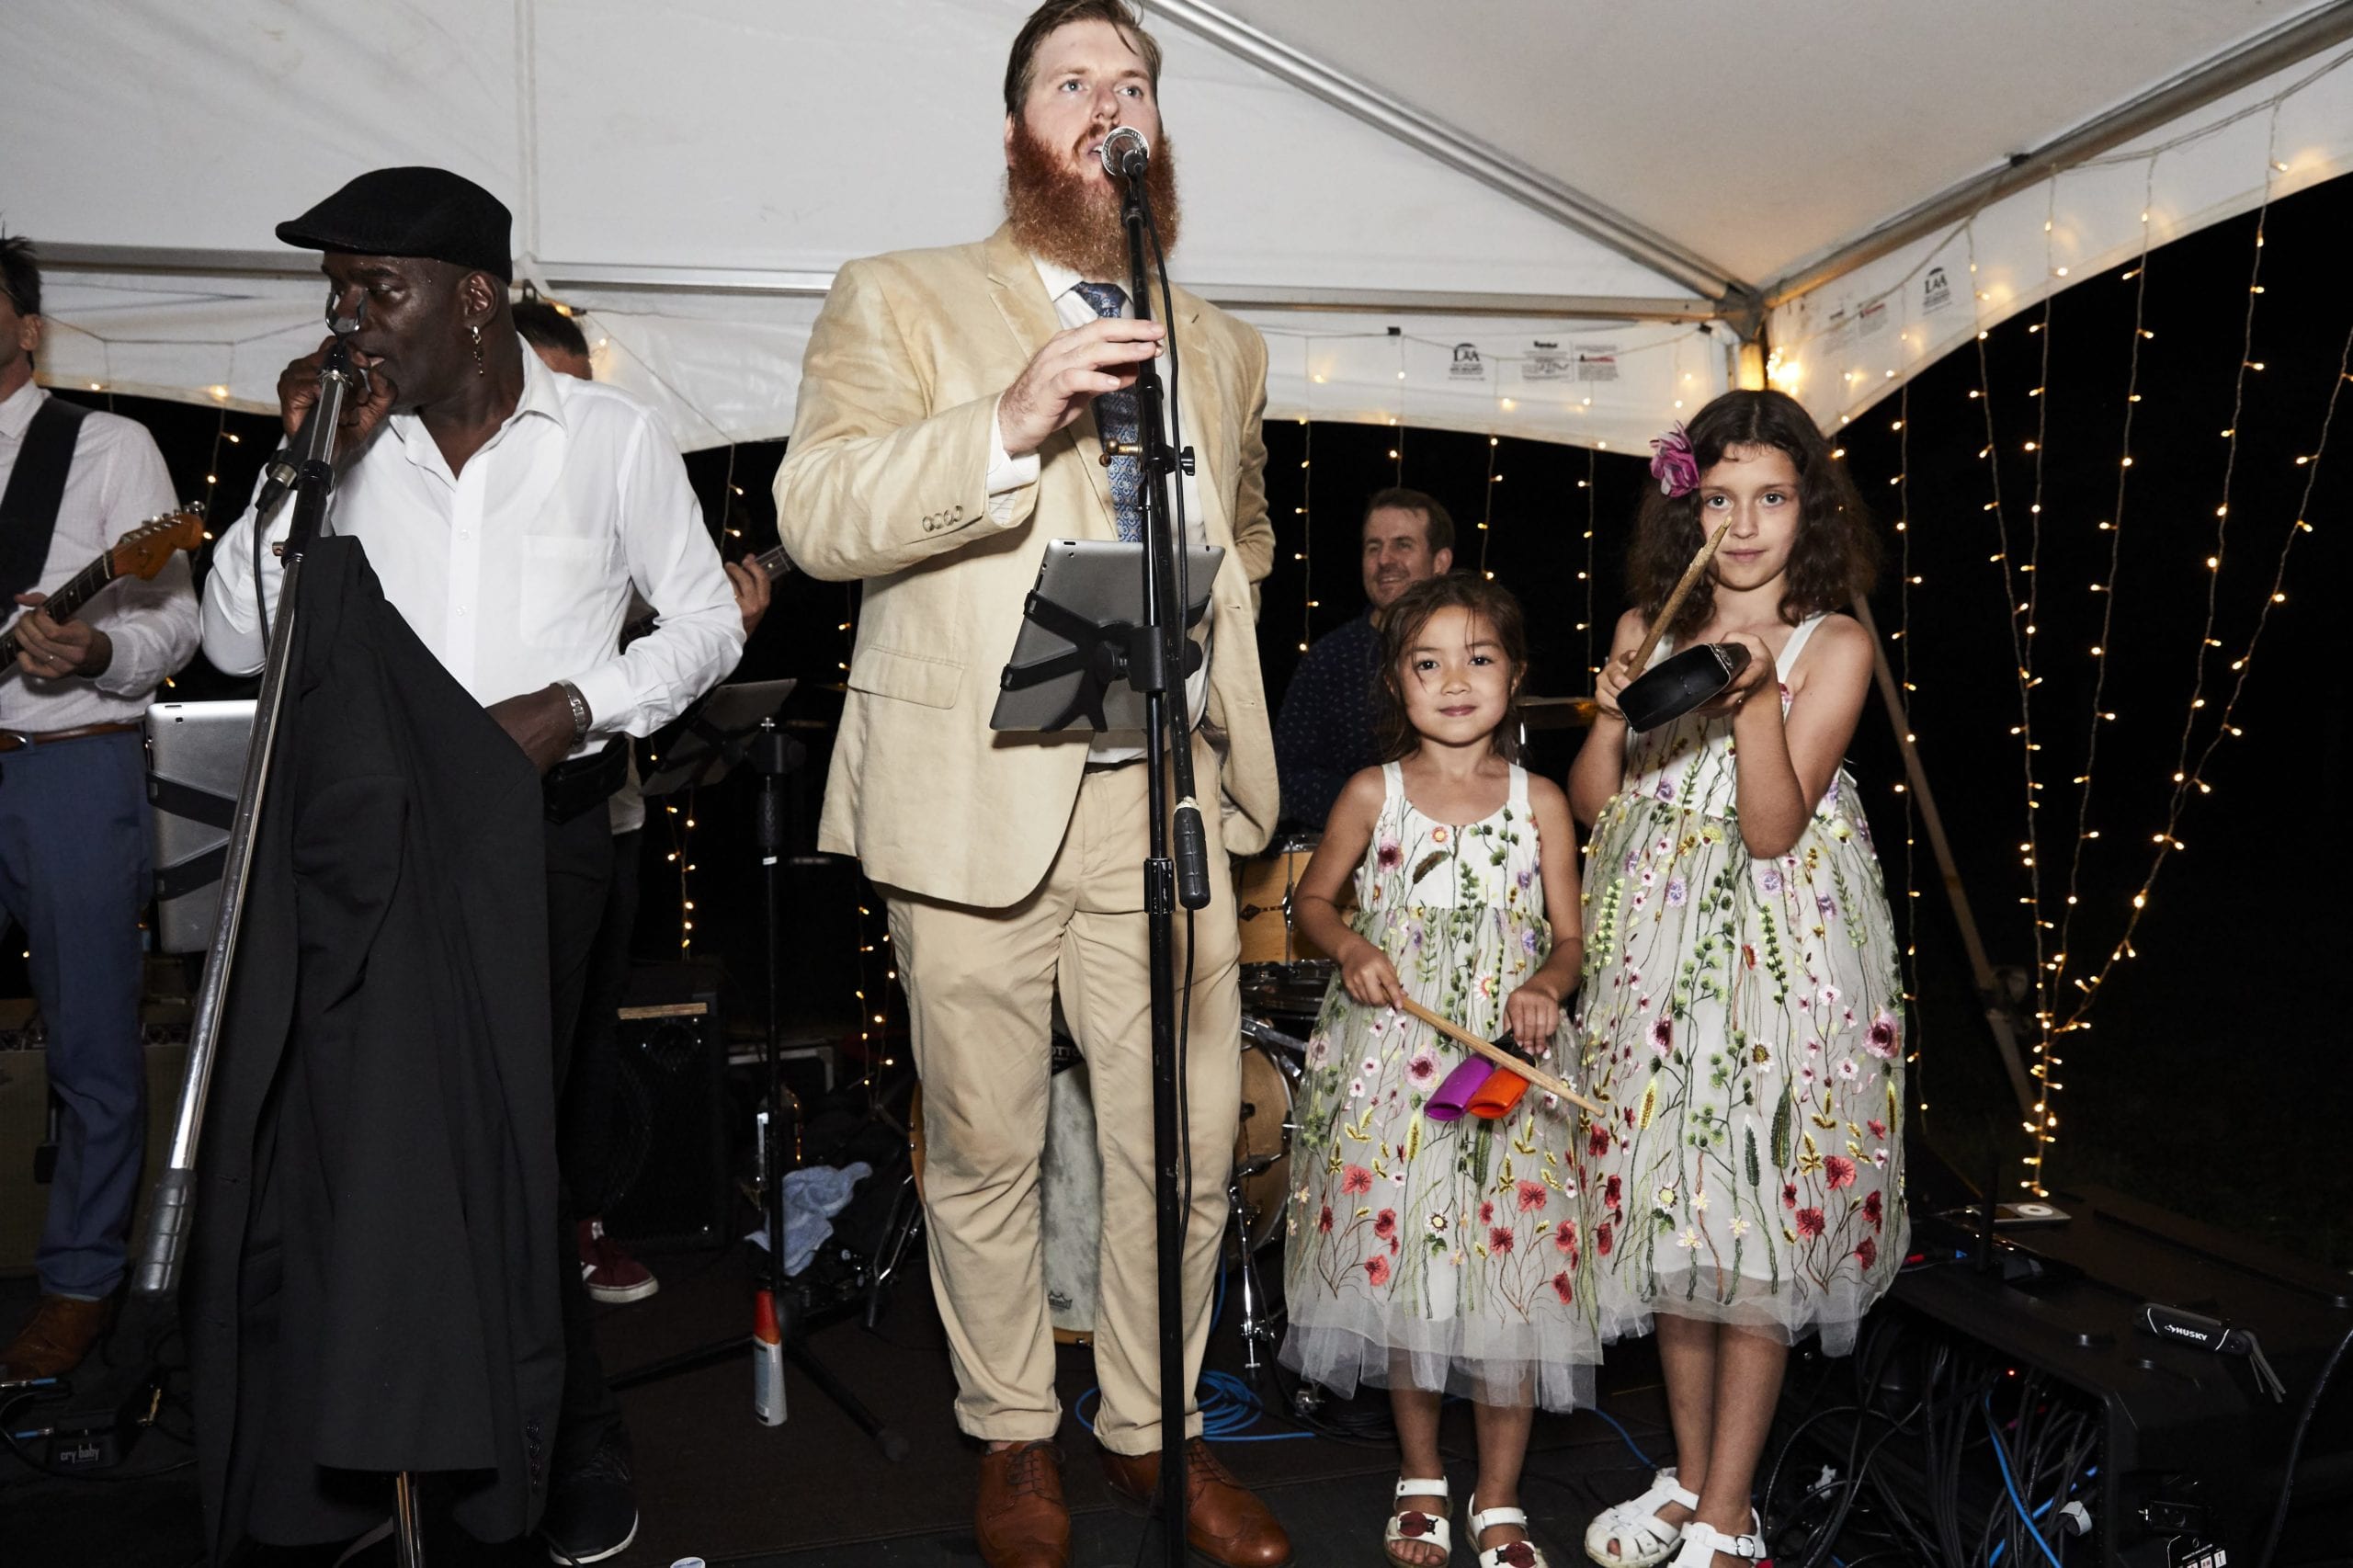 Wedding band with flower girls on percussion